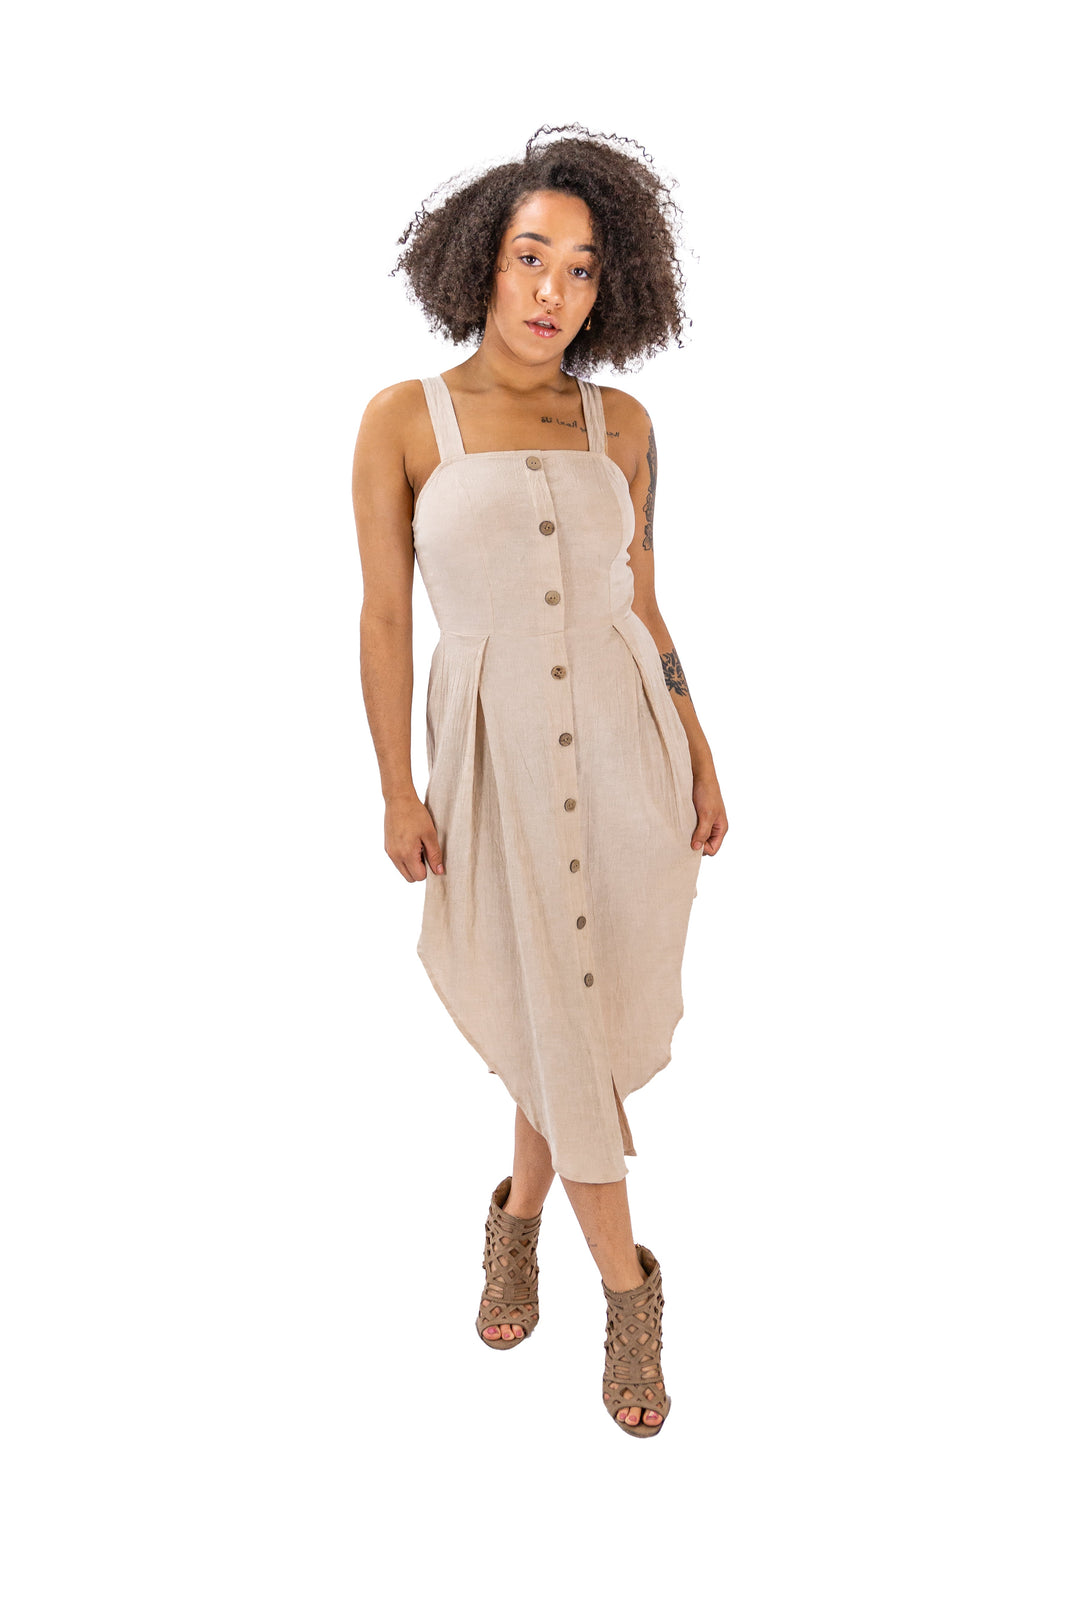 Elegant Beige Sleeveless Button-Down Midi Dress by Fabonics, Perfect for Any Occasion